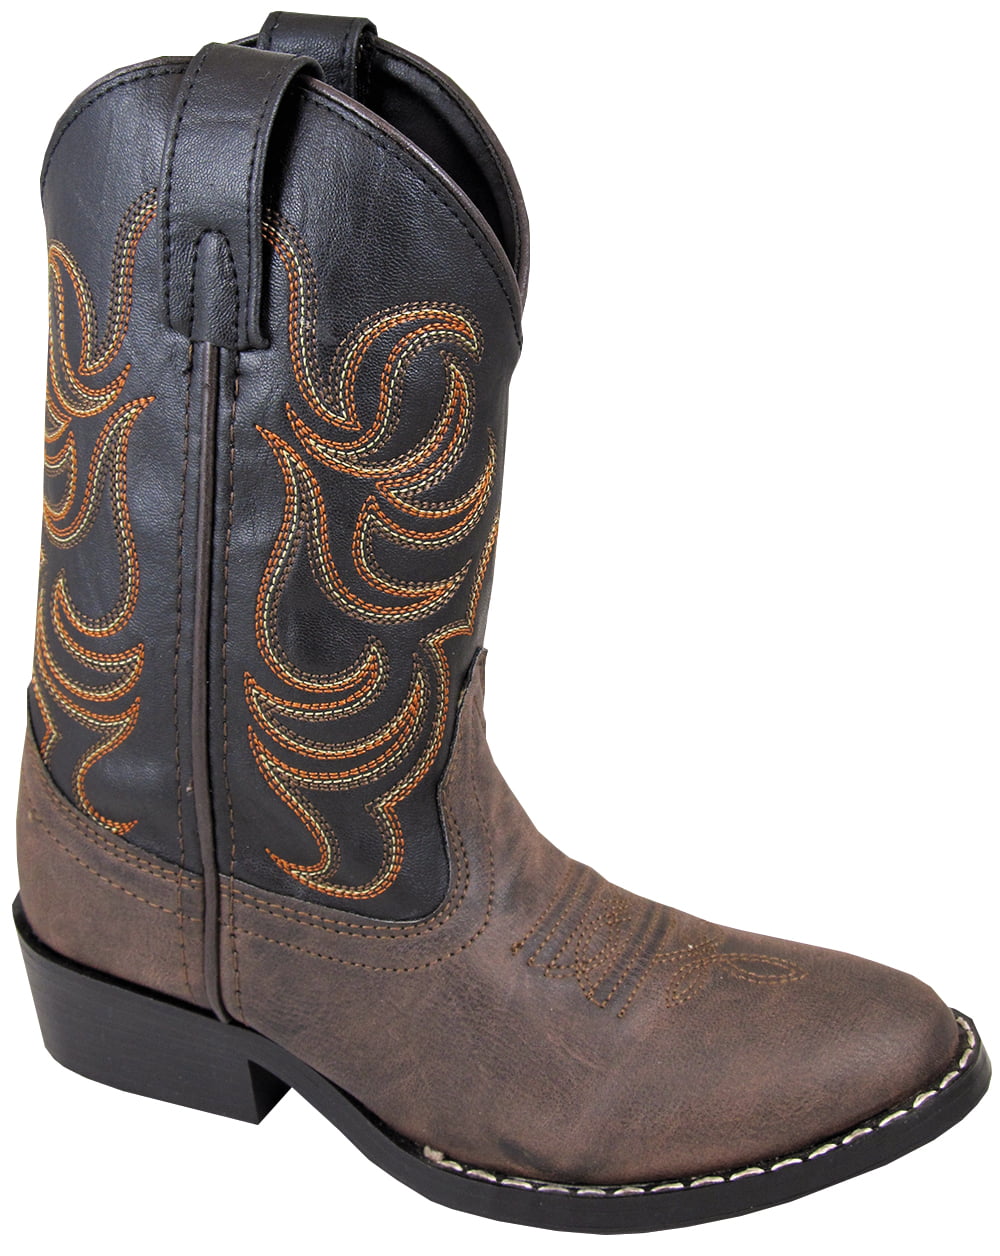 Boys Toddler Brown Buffalo Bison Cowboy Boots Western Leather Point Toe Children 